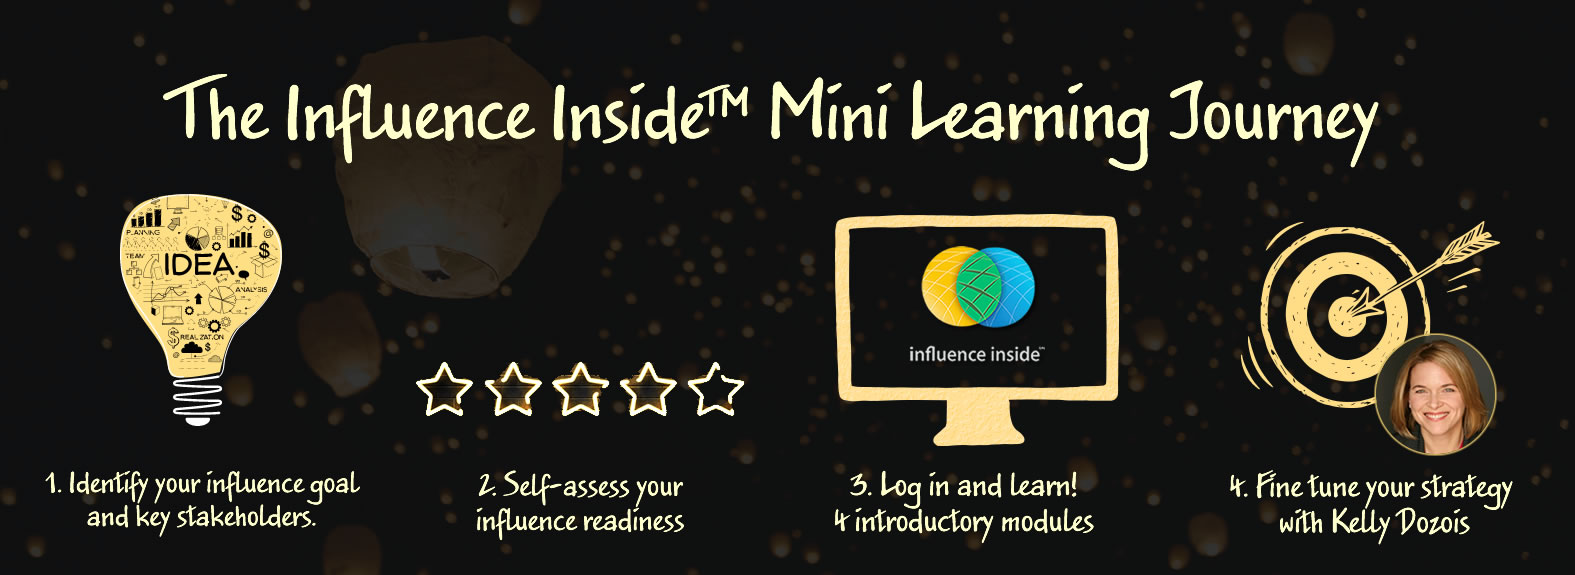 The Influence Inside Mini Learning Journey